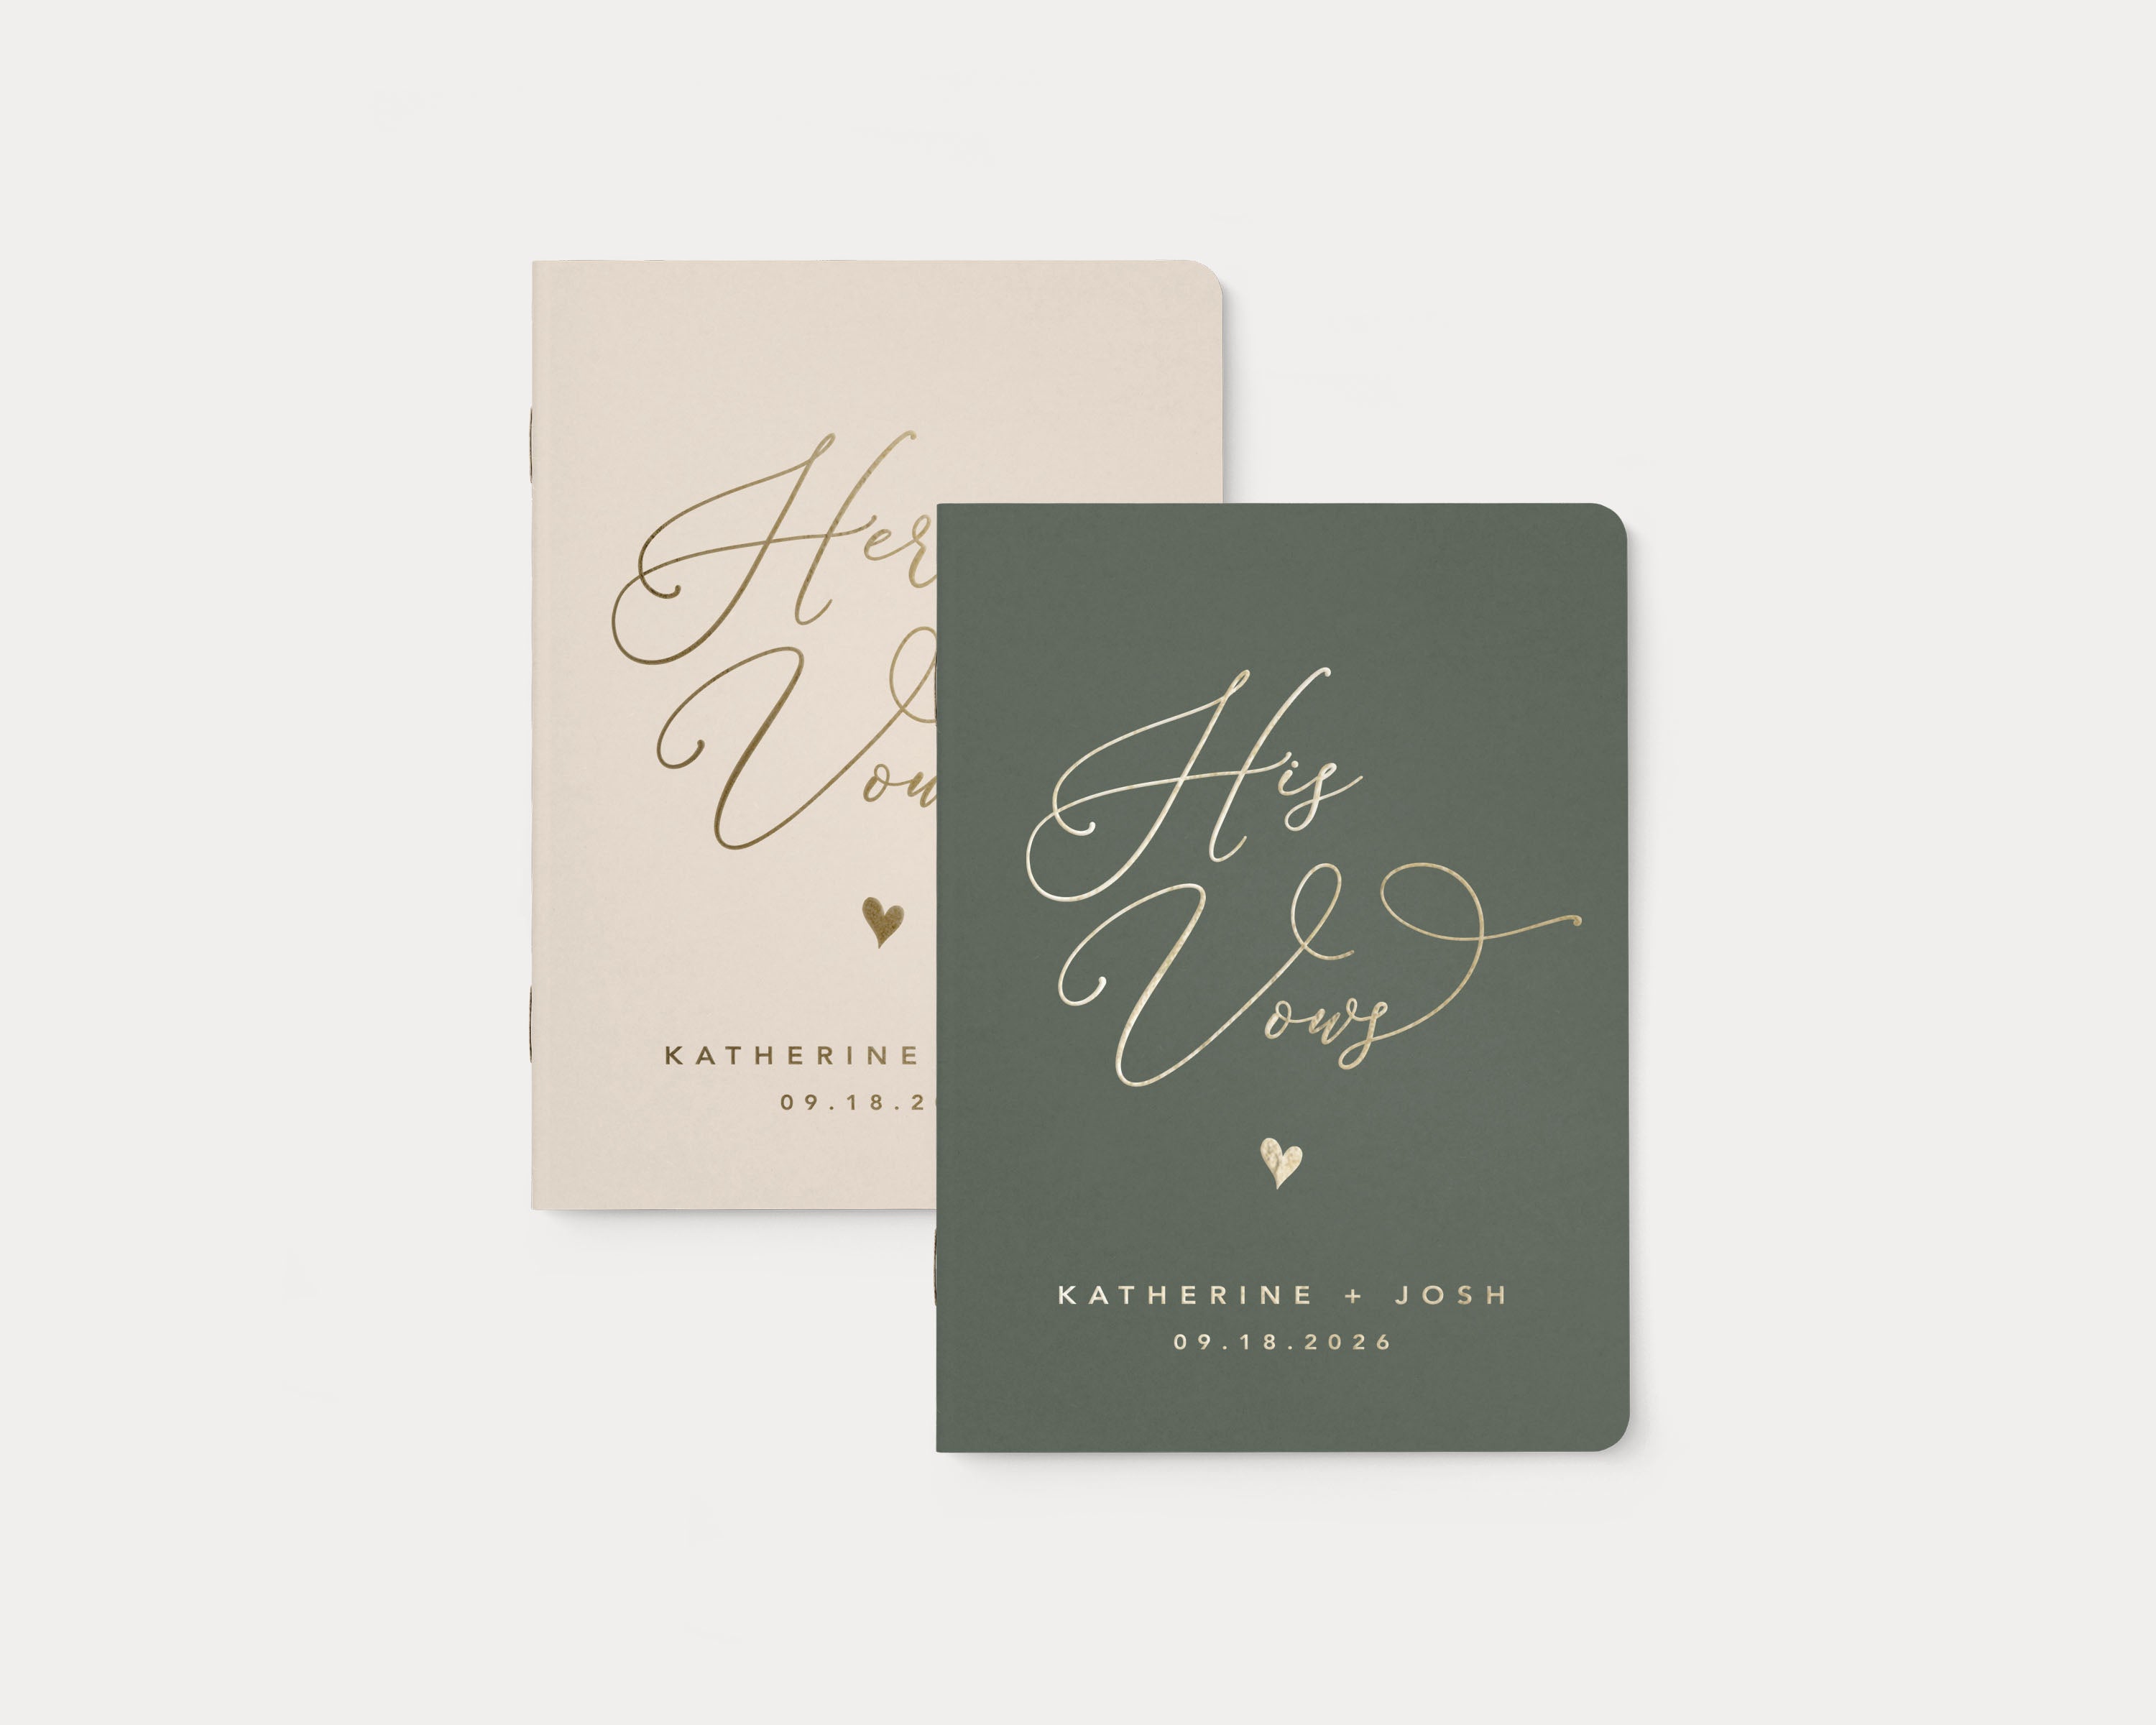 Almond and moss wedding vow books with custom gold foil lettering.